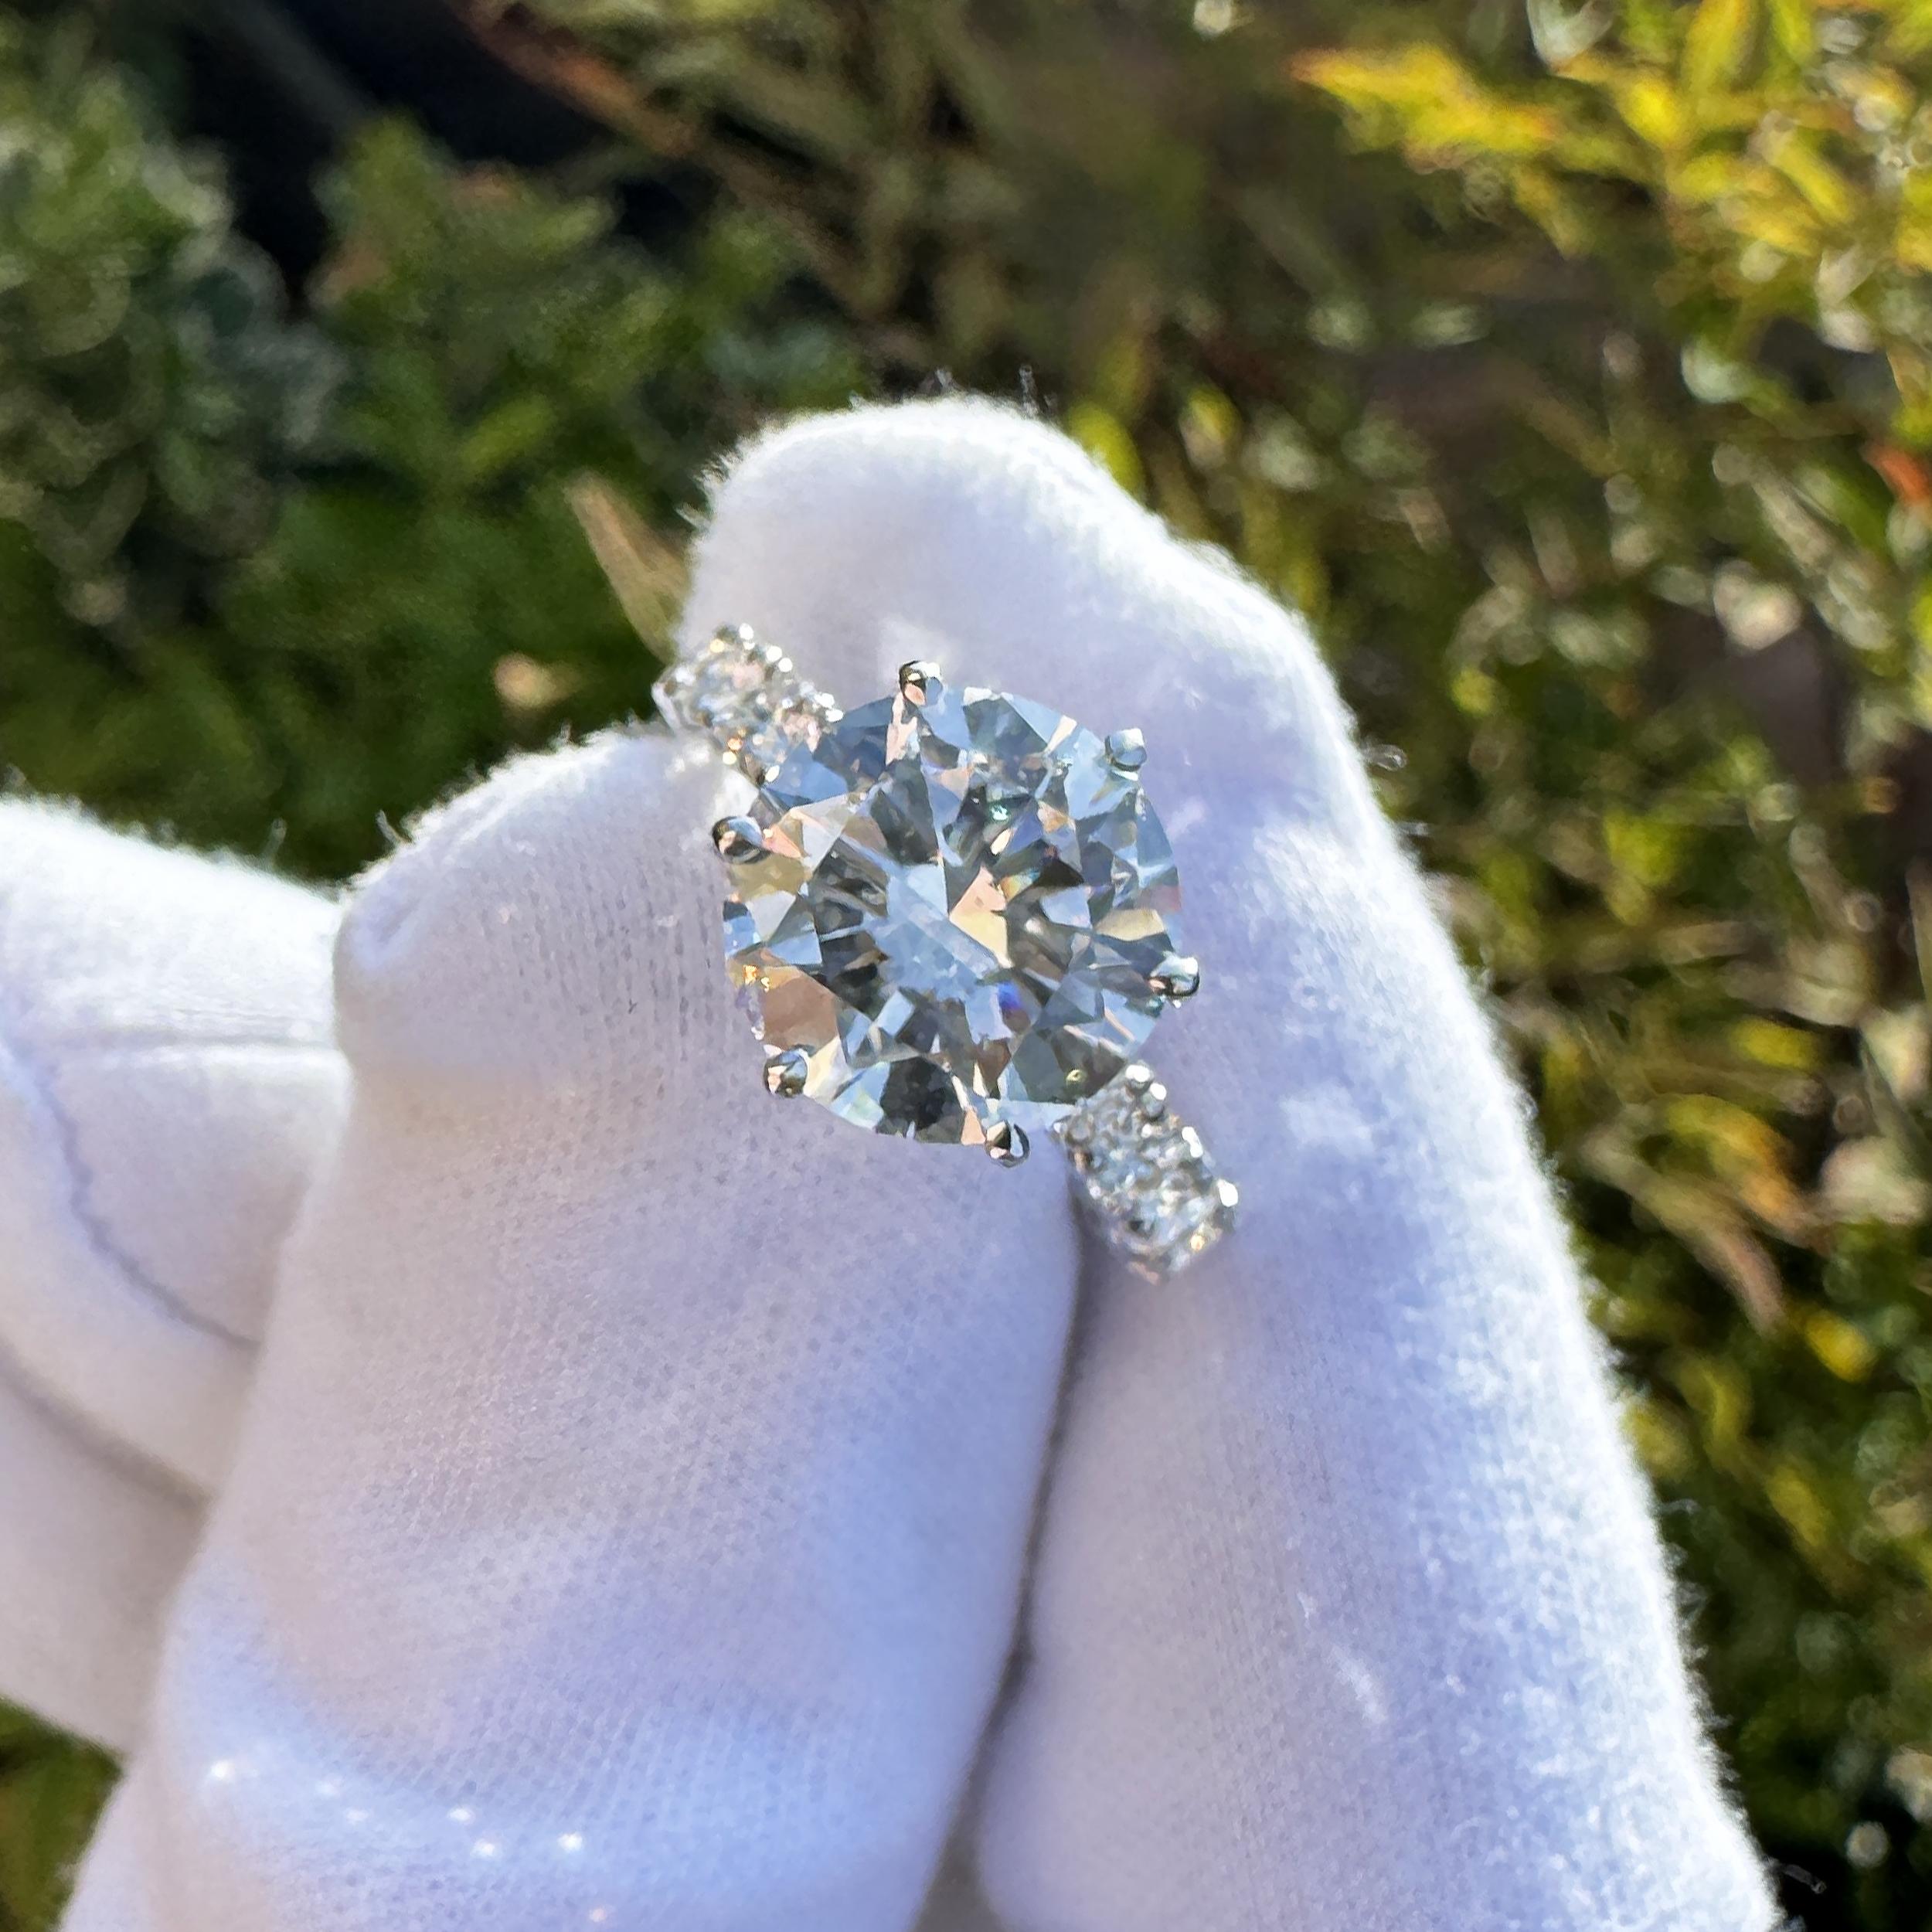 Stunning 5.01 ct GIA-certified Diamond in 18kt White Gold setting with 1.99 ct brilliant white diamonds.

We can adapt or replace the setting to suit your needs. Please contact us for any information.

GIA Report Number = 15678430
Shape and Cutting